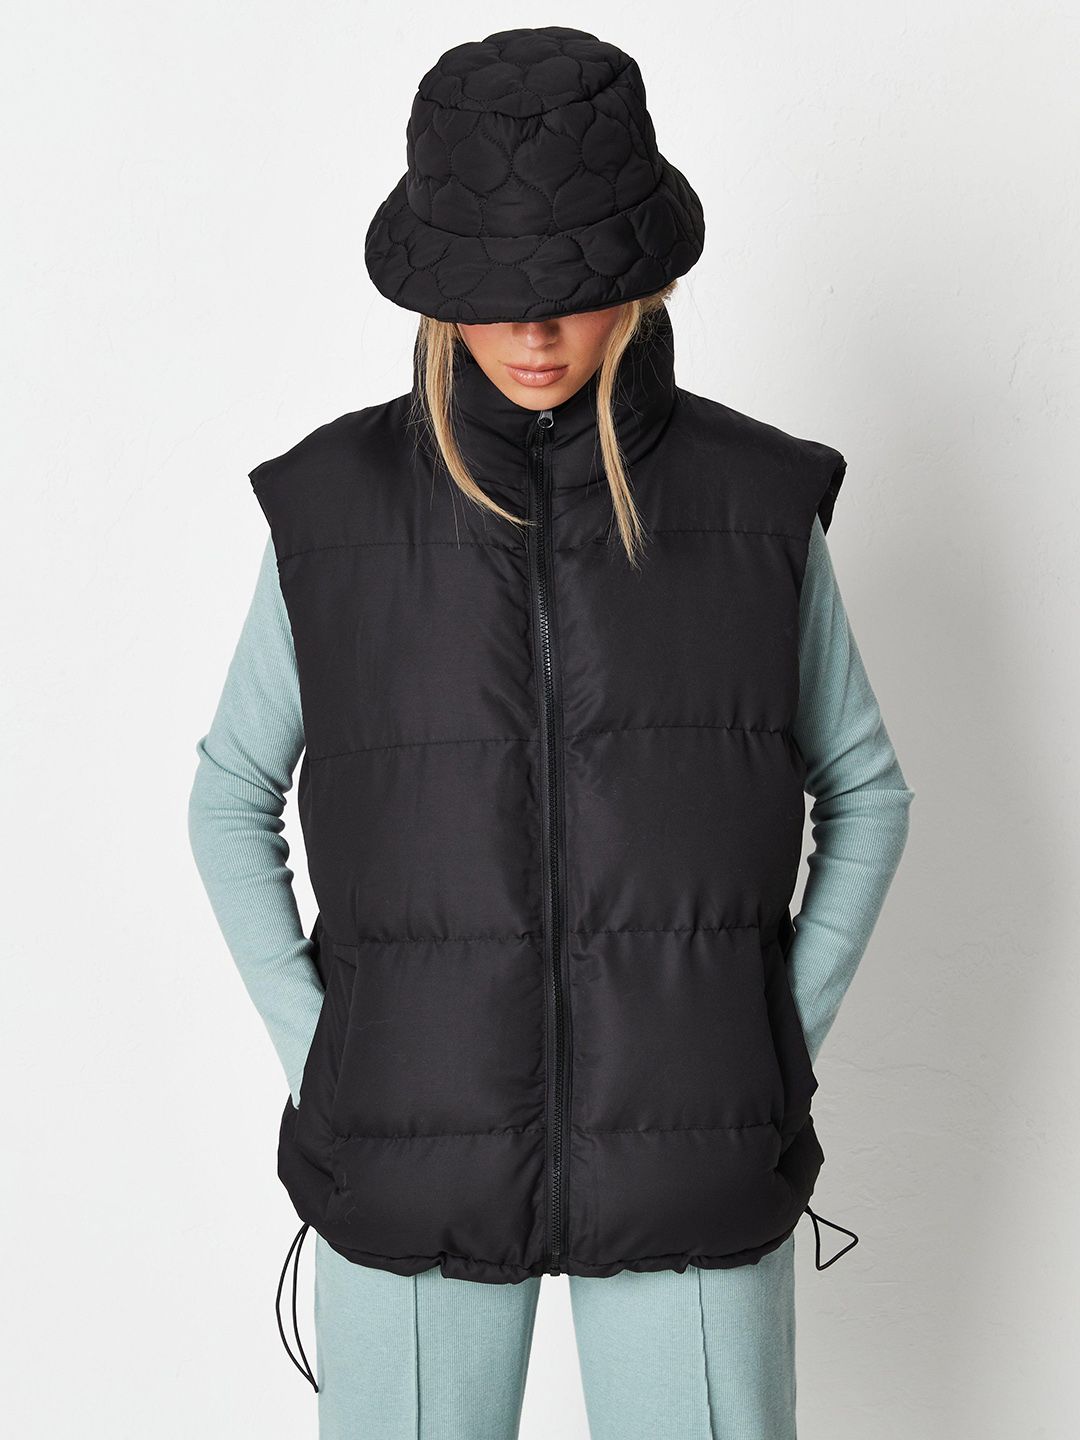 Missguided Women Black Solid Padded Jacket Price in India